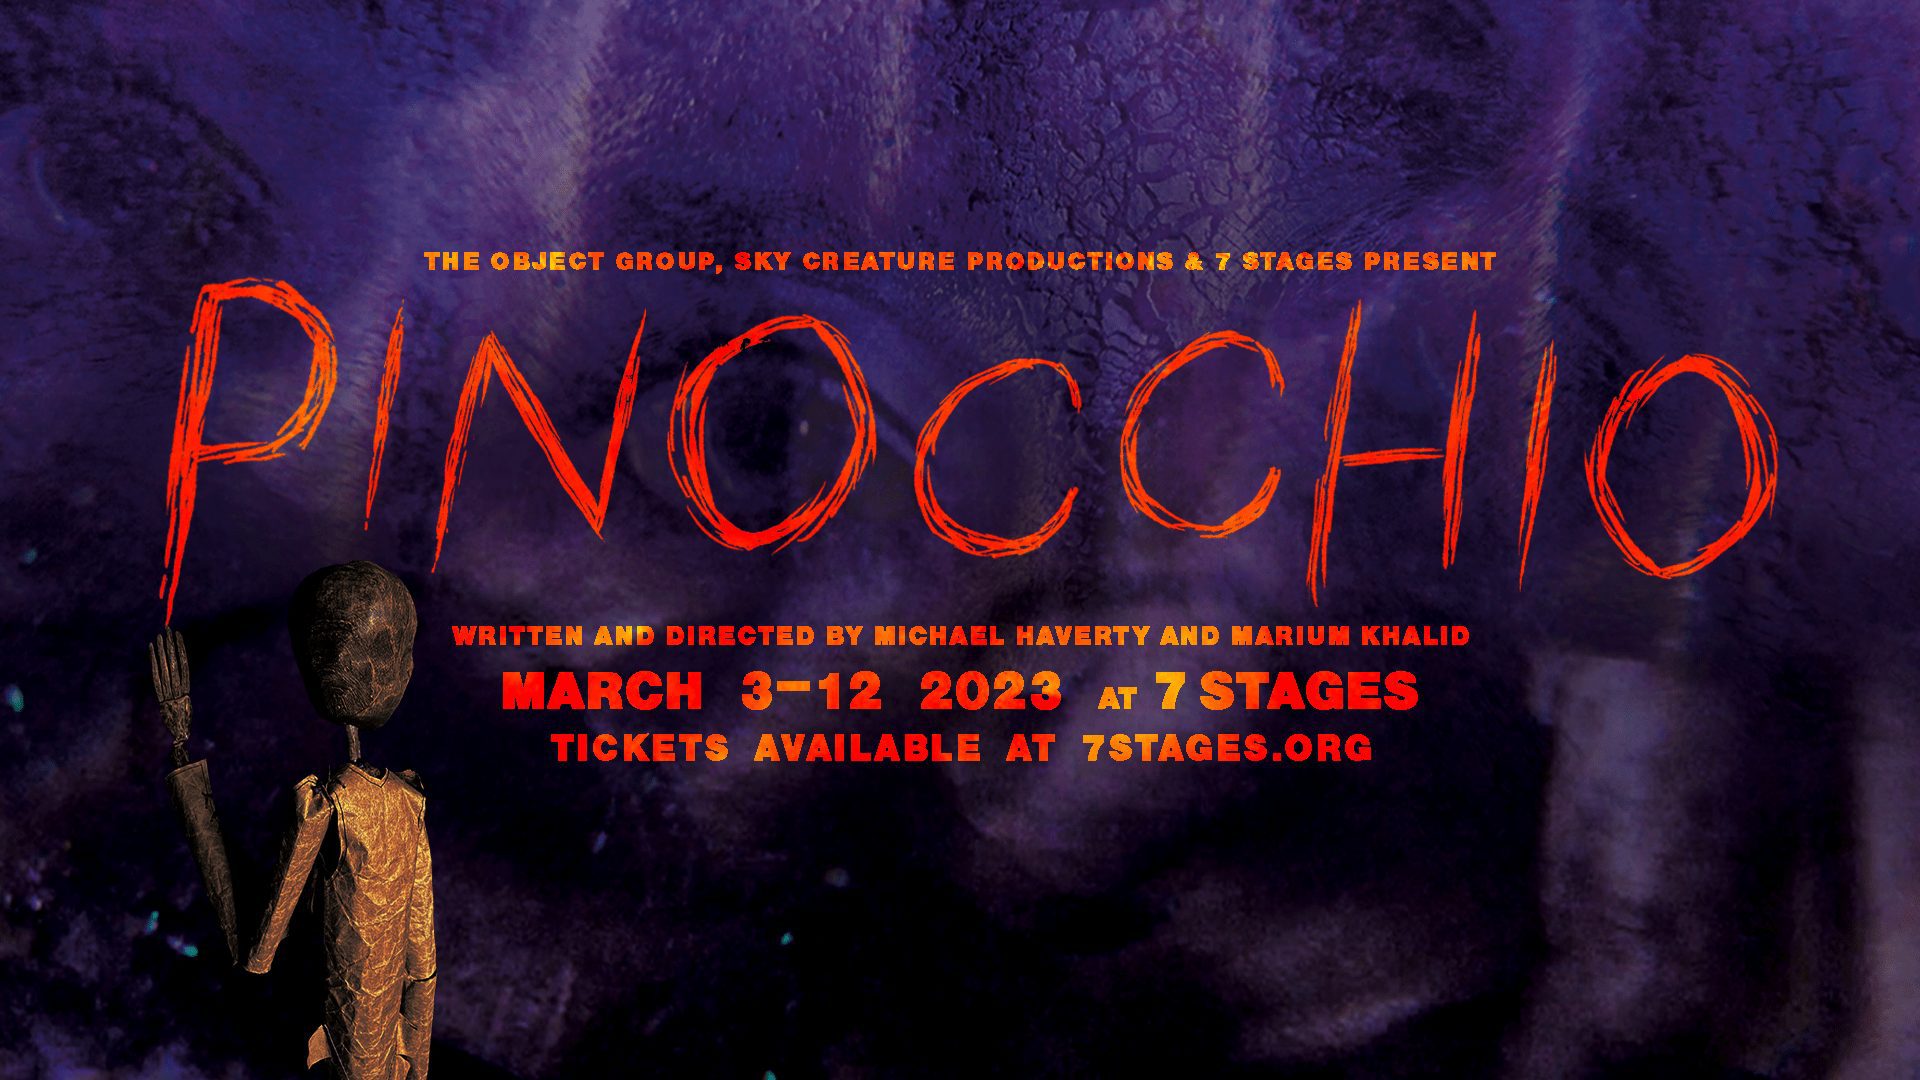 The Object Group, Sky Creature Productions and 7 Stages present Pinocchio. Written and directed by Michael Haverty and Marium Khalid. March 3-12, 2023 at 7 Stages. Tickets available at 7stages.org